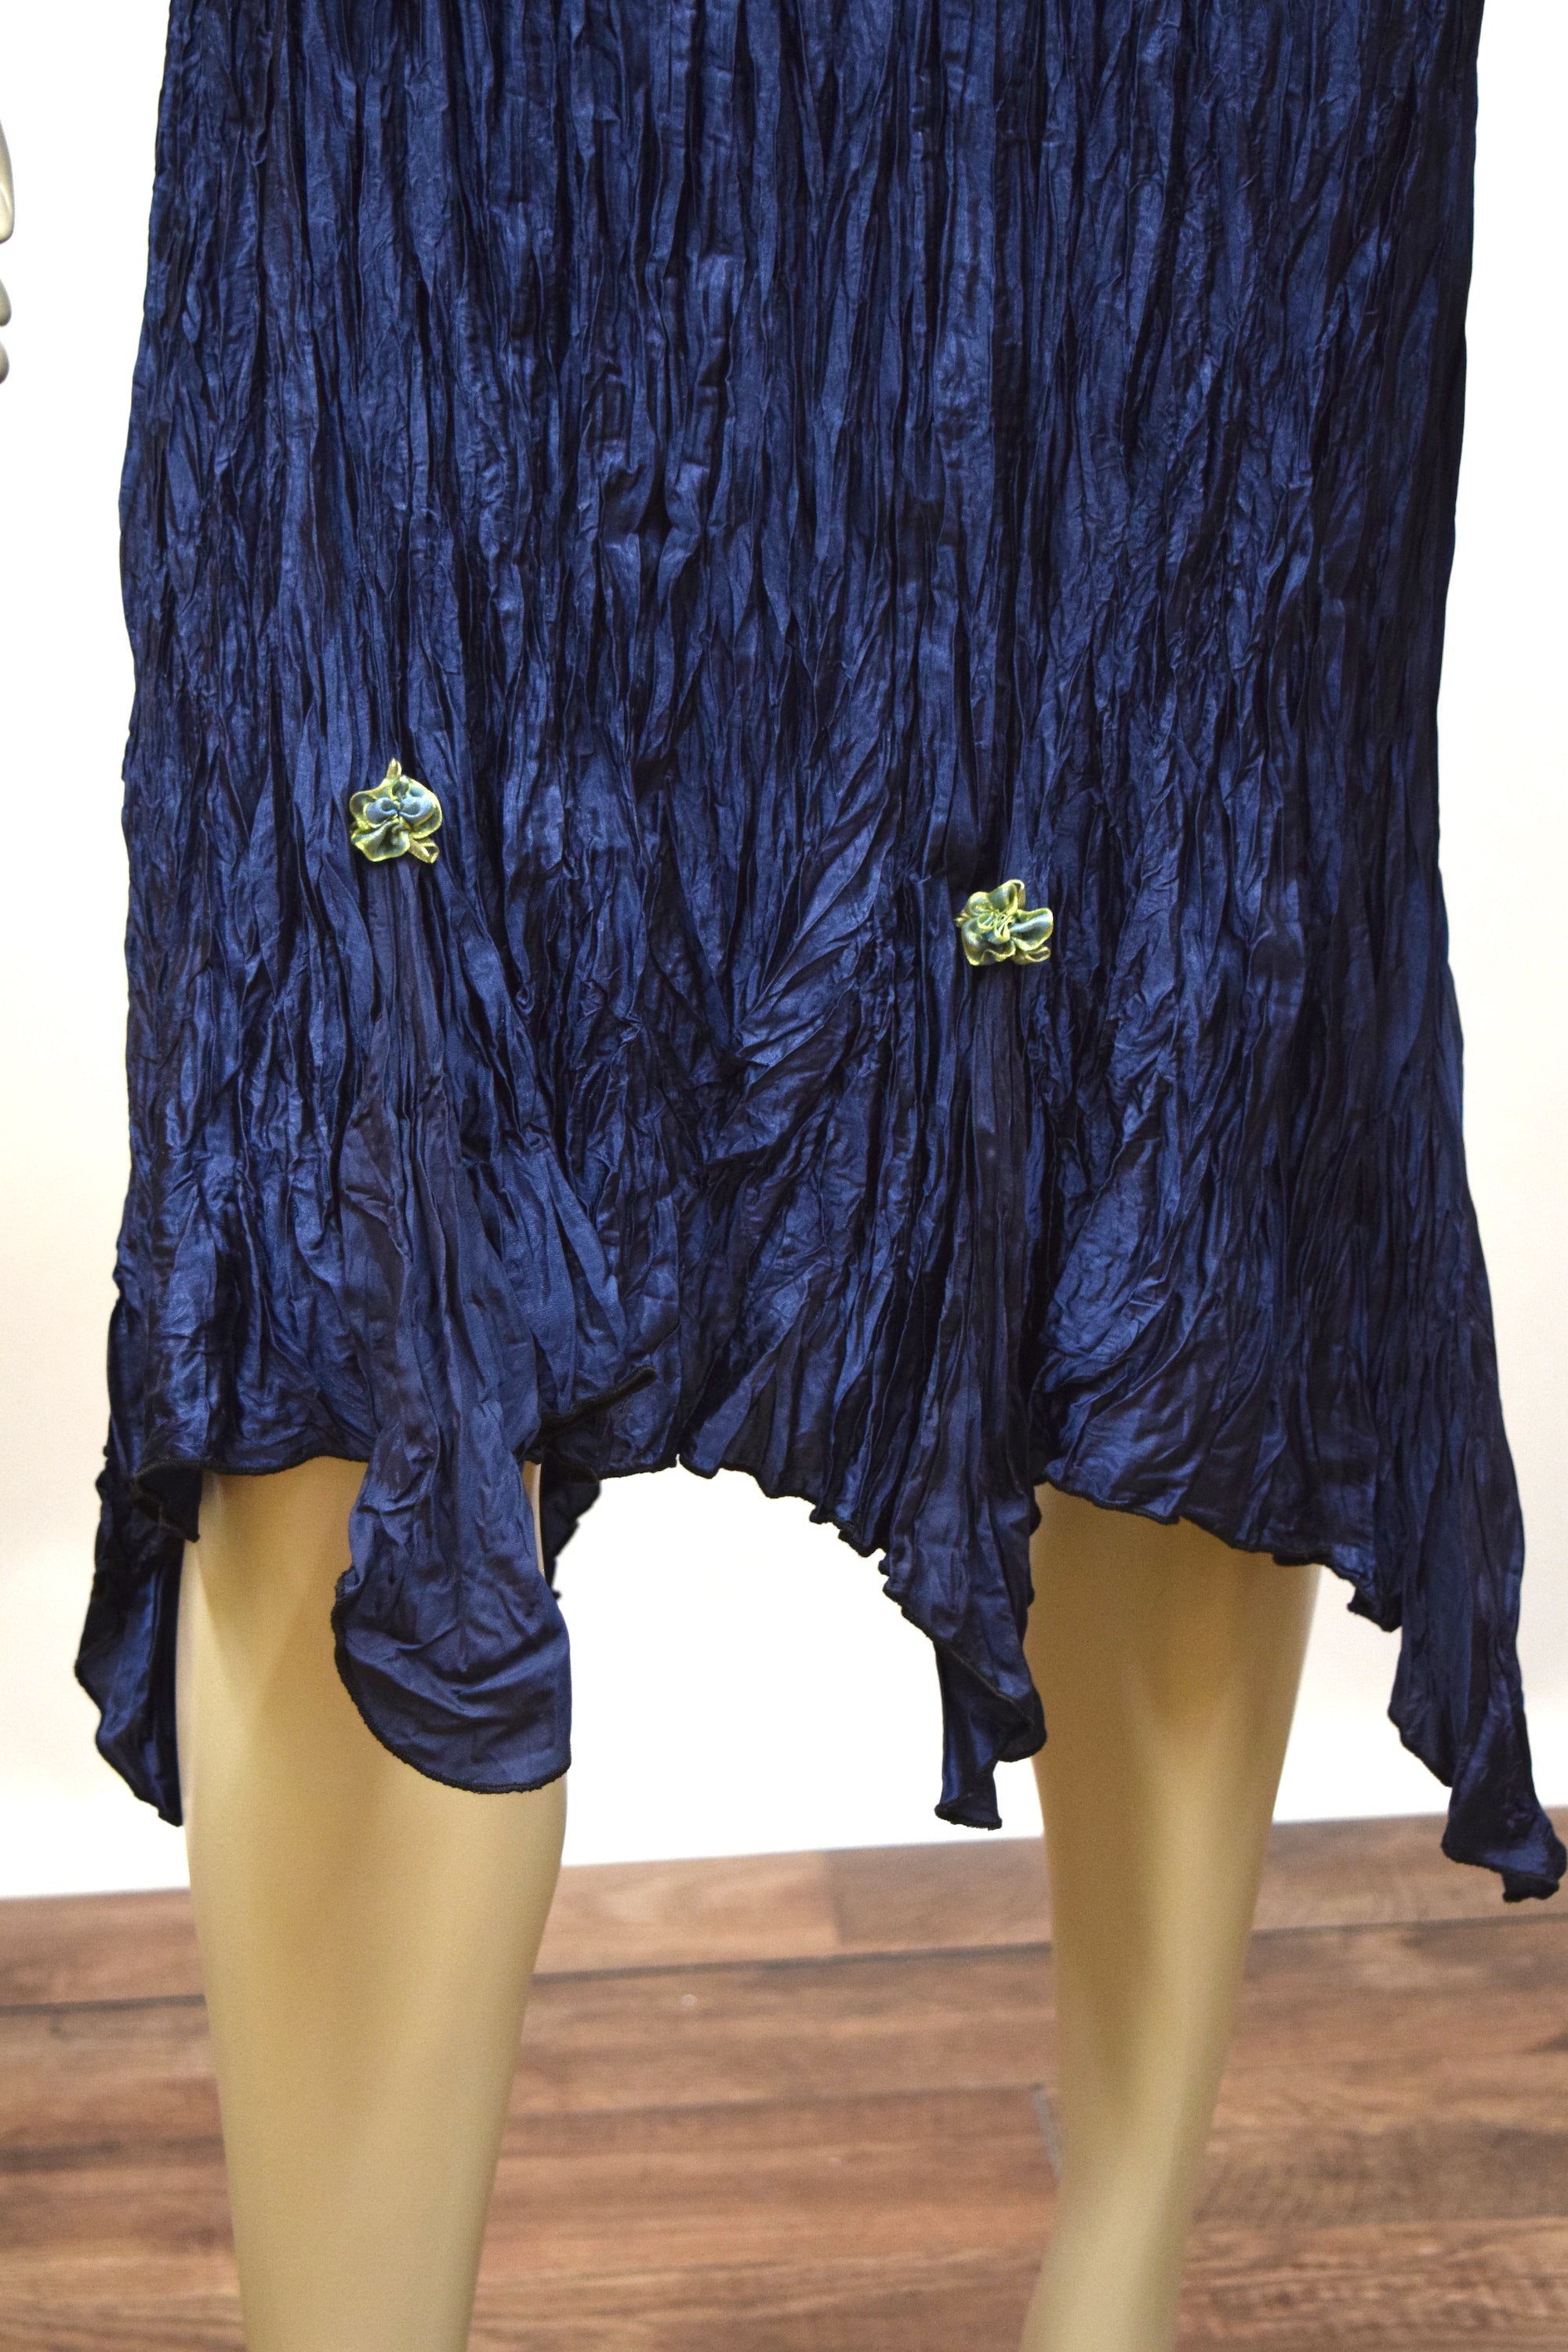 Fanciful Dress in Navy by Lee Anderson